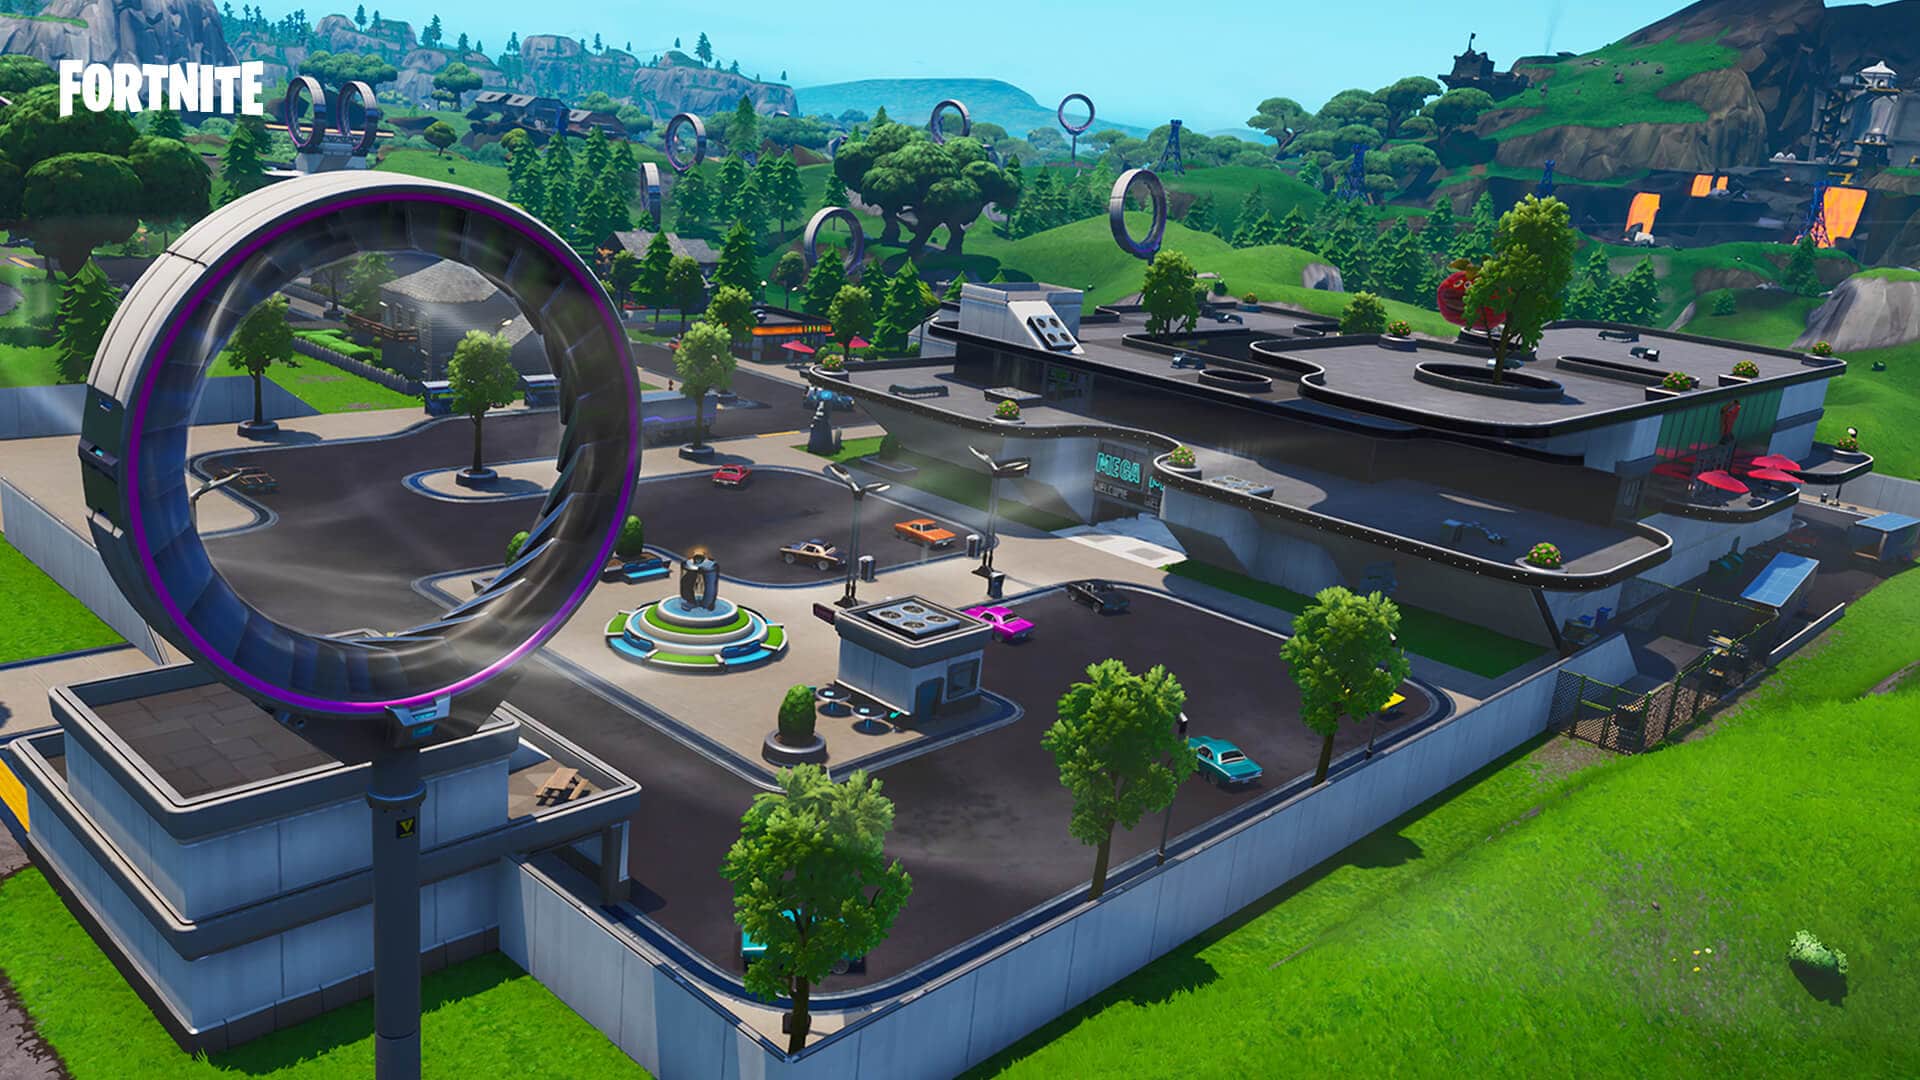 Fortnite Updates All Fortnite Battle Royale Patch Notes And More - 